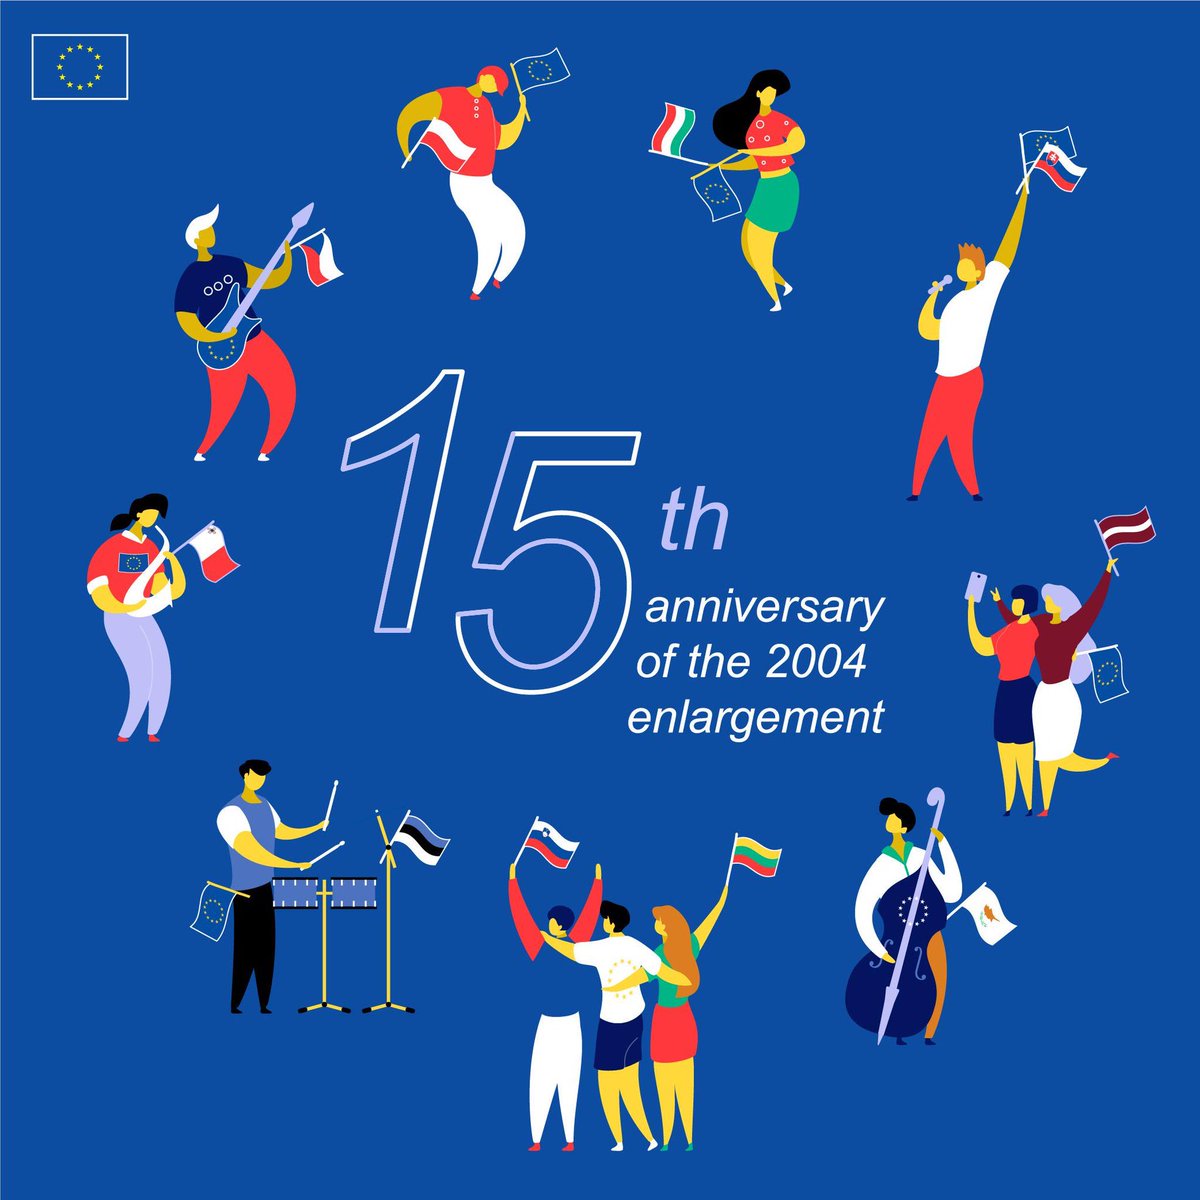 15 years ago on this day 10 countries took their rightful place in the heart of our Union. We seized the unique moment and reconciled Europe’s history with our geography. I remain an ardent fan of #EUenlargement 🇪🇺.

🇨🇿 🇨🇾 🇱🇹 🇸🇰 🇸🇮 🇭🇺 🇪🇪 🇲🇹 🇵🇱 🇱🇻